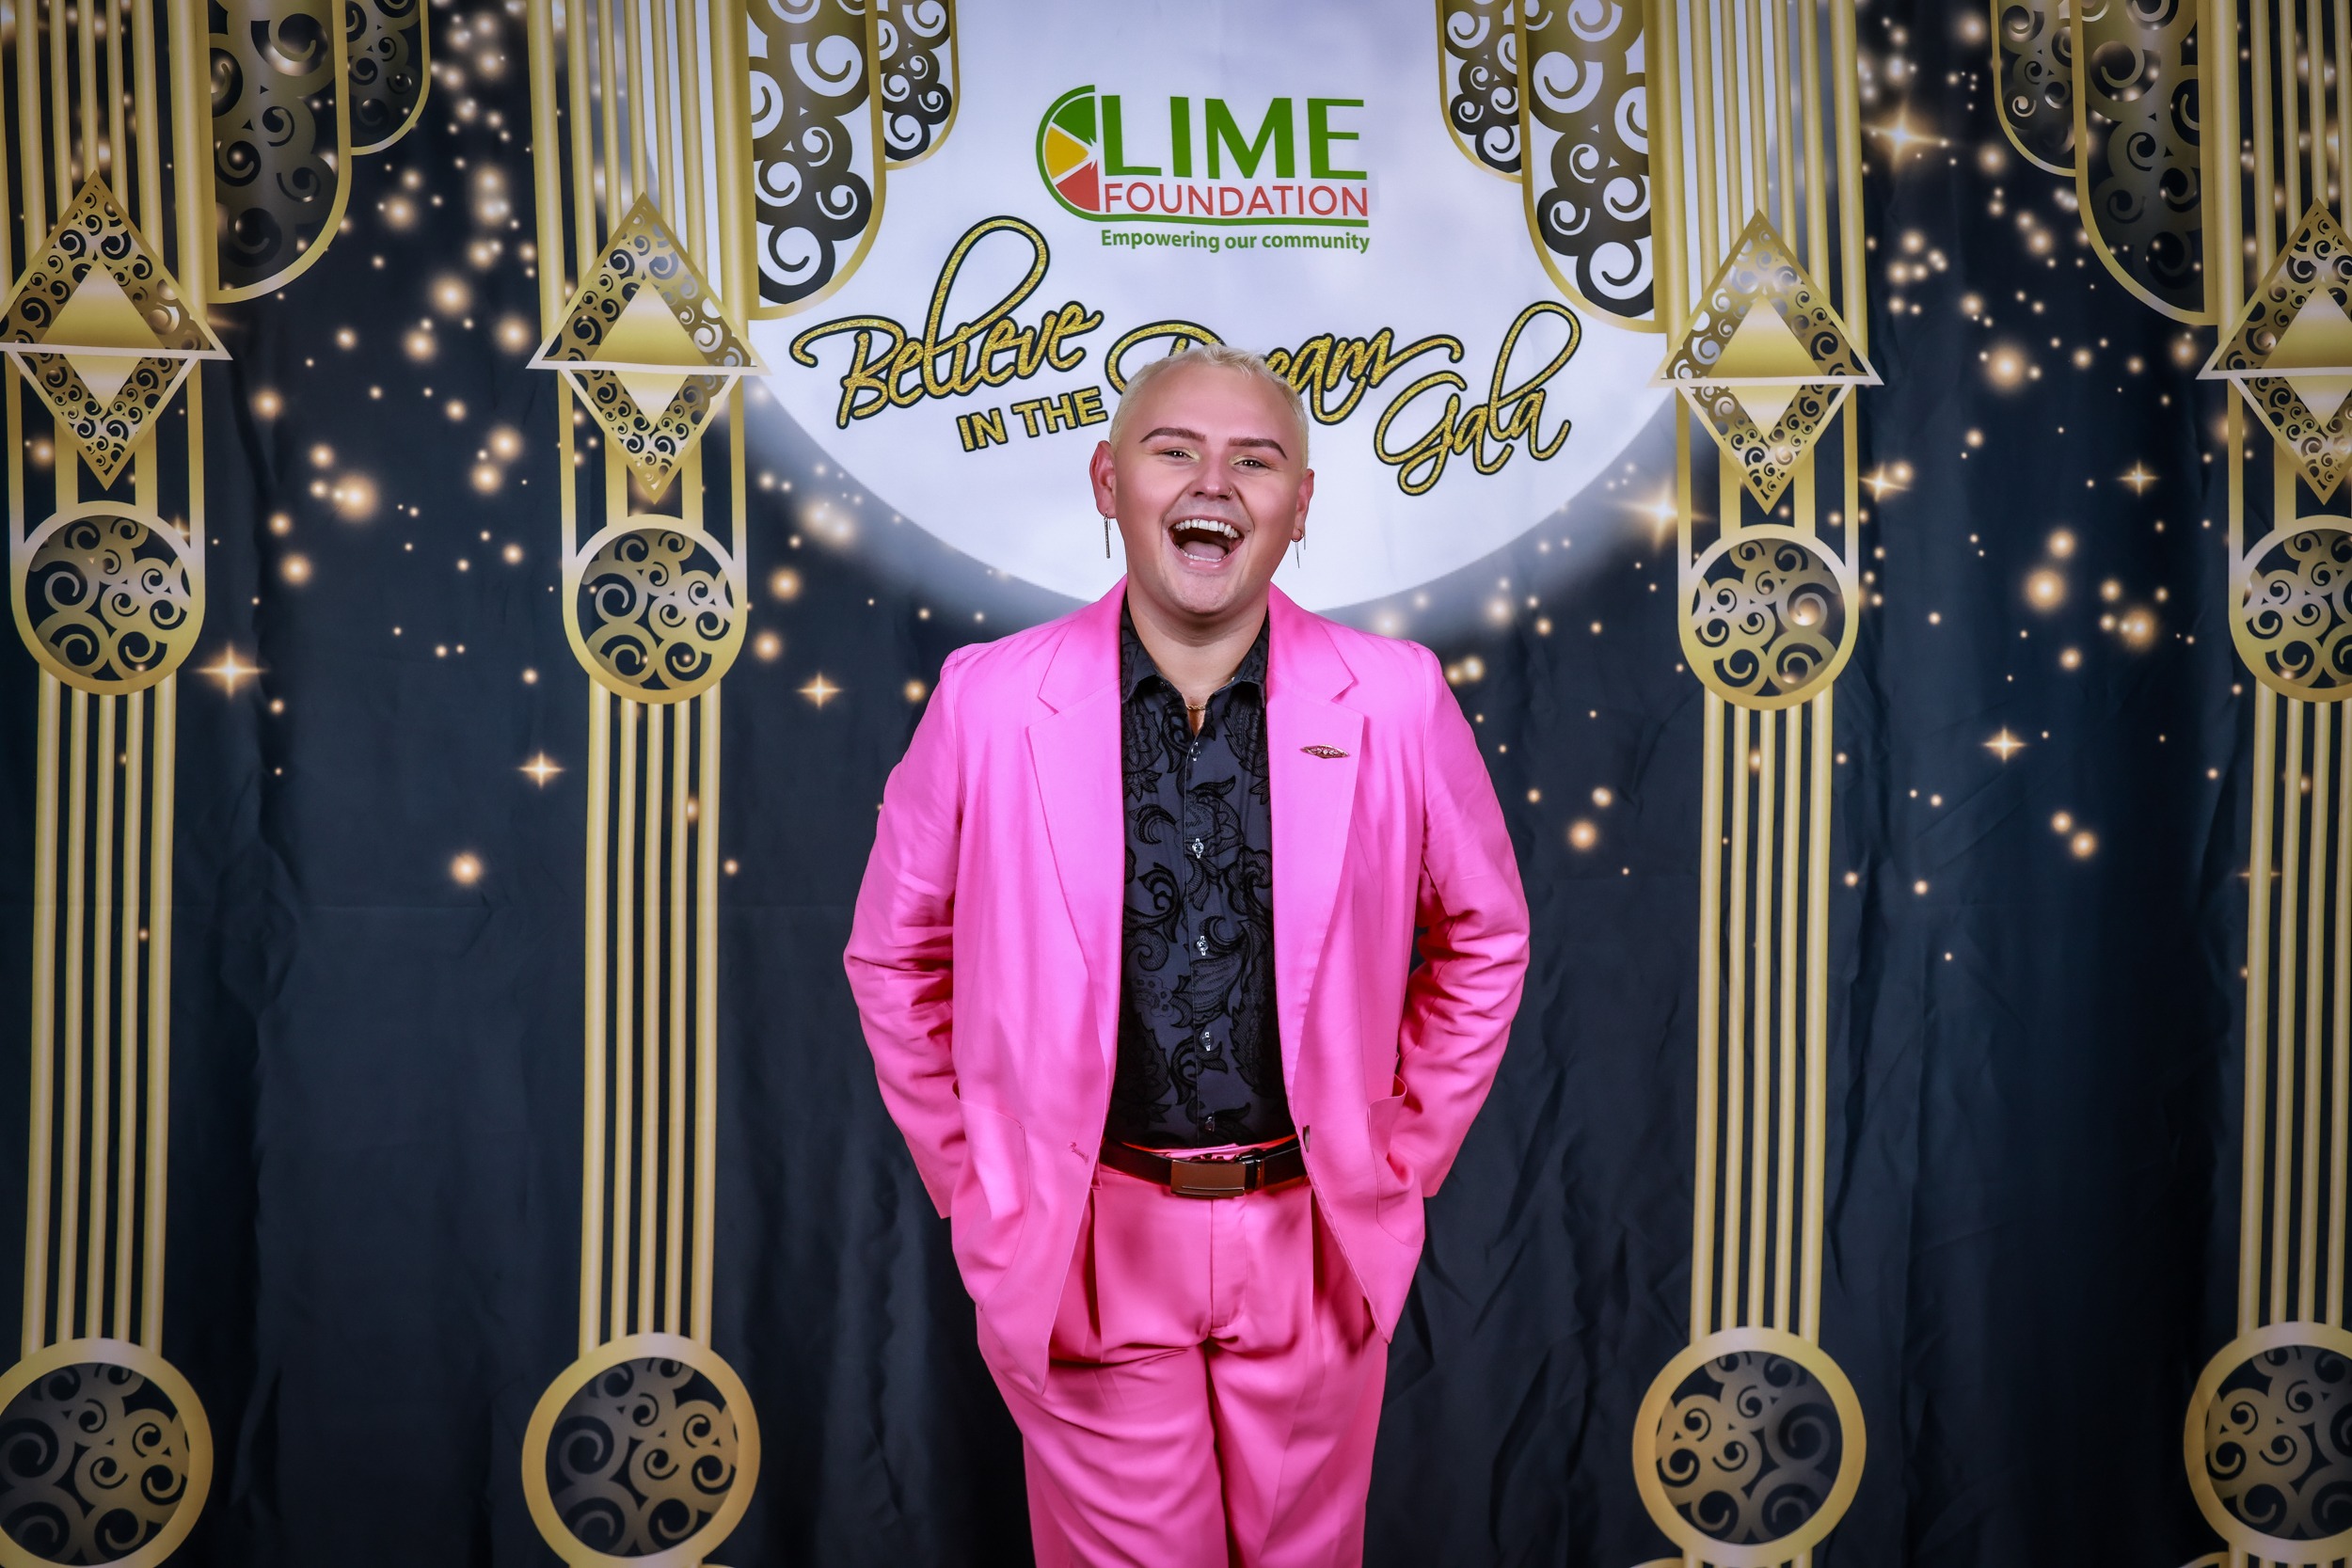 A man in a pink suit posing for a photo at a Santa Rosa Non-Profit event.